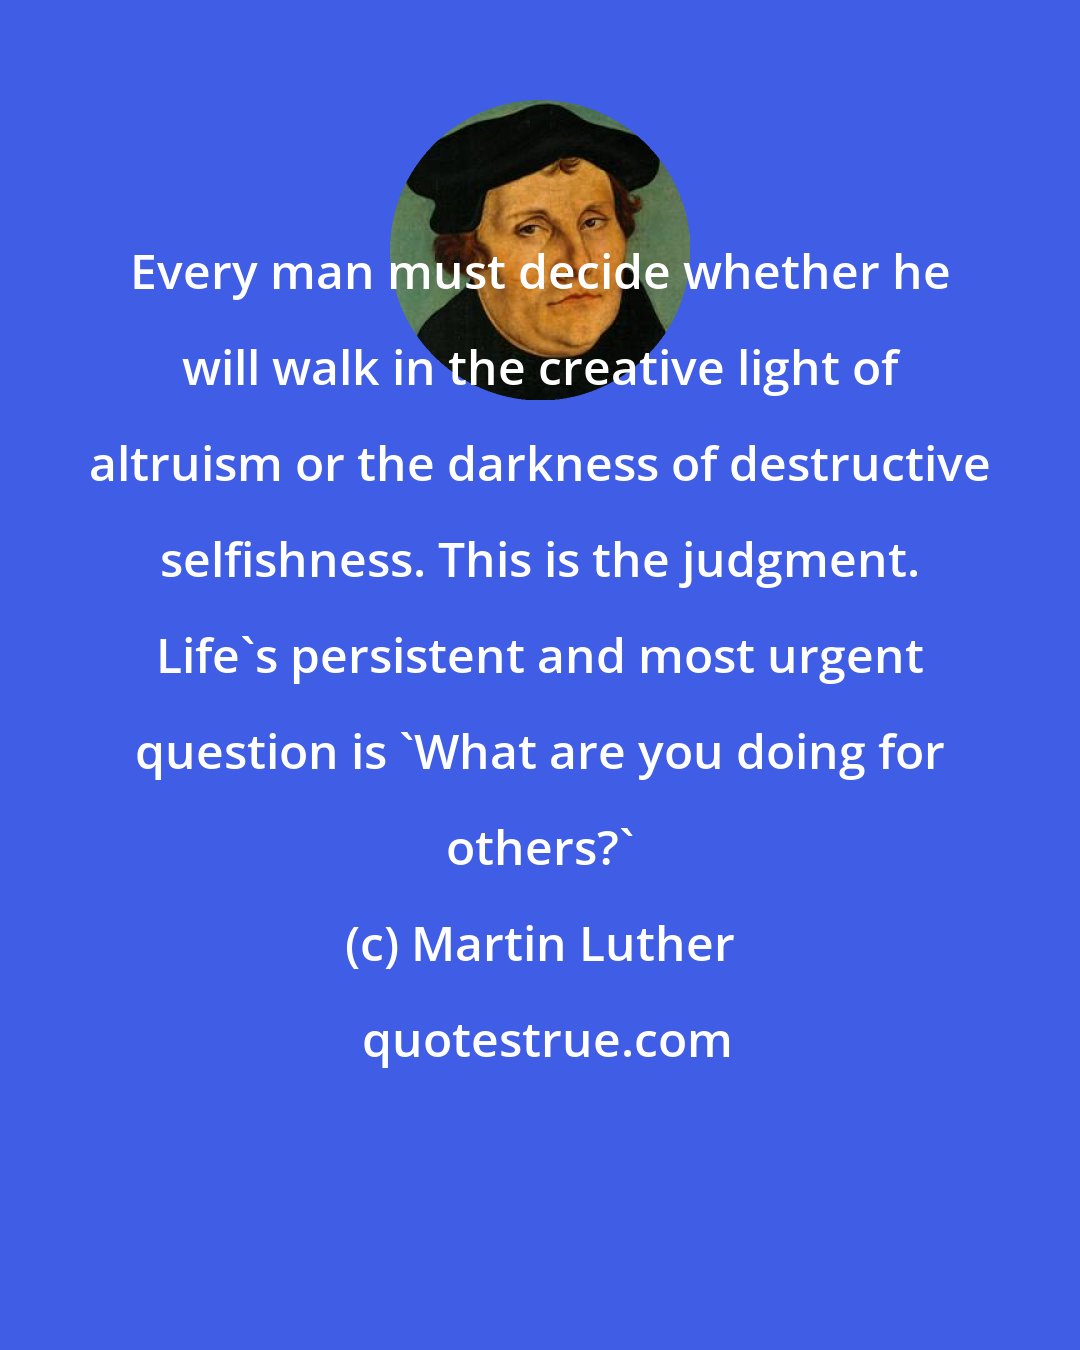 Martin Luther: Every man must decide whether he will walk in the creative light of altruism or the darkness of destructive selfishness. This is the judgment. Life's persistent and most urgent question is 'What are you doing for others?'